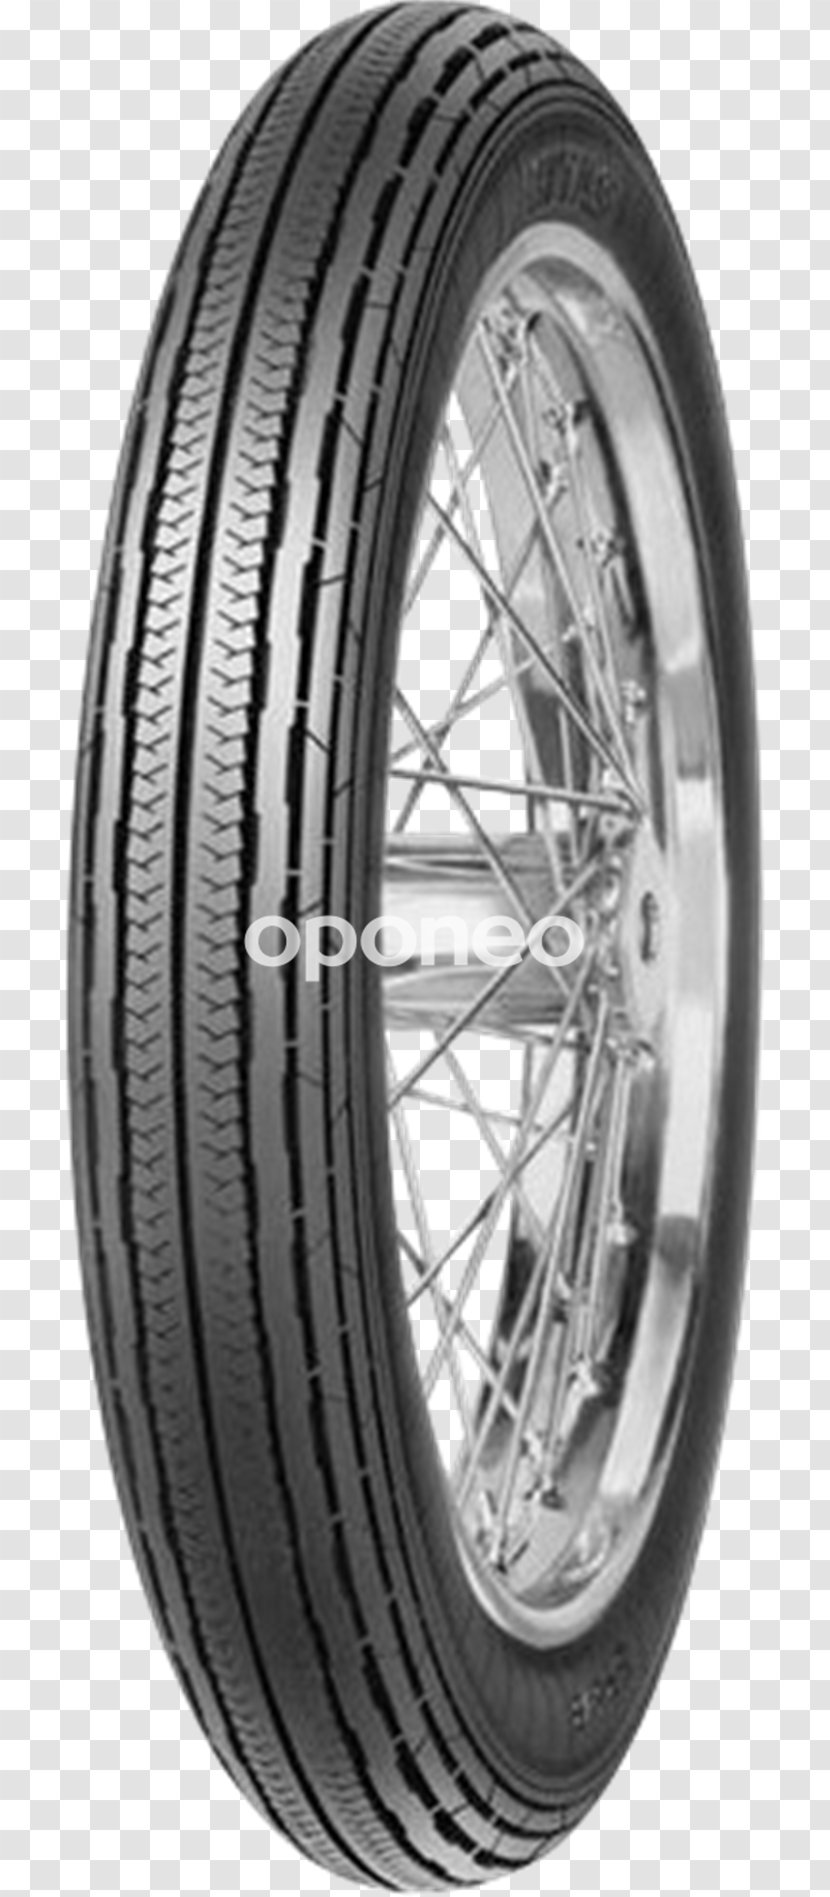 Motorcycle Tires Wheel Binnenband - Formula One Tyres Transparent PNG